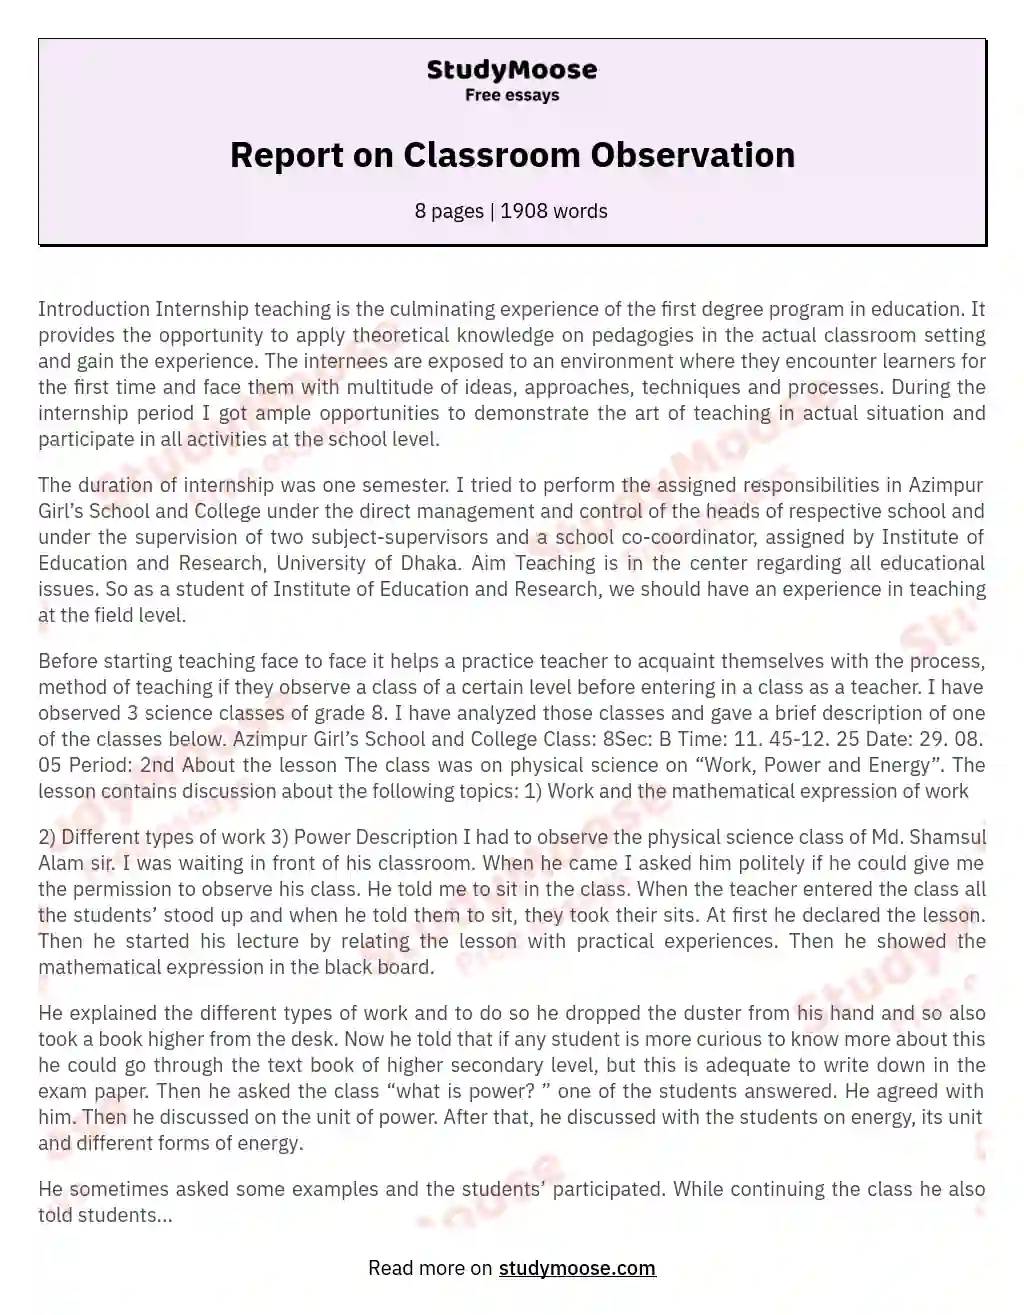 Report on Classroom Observation essay